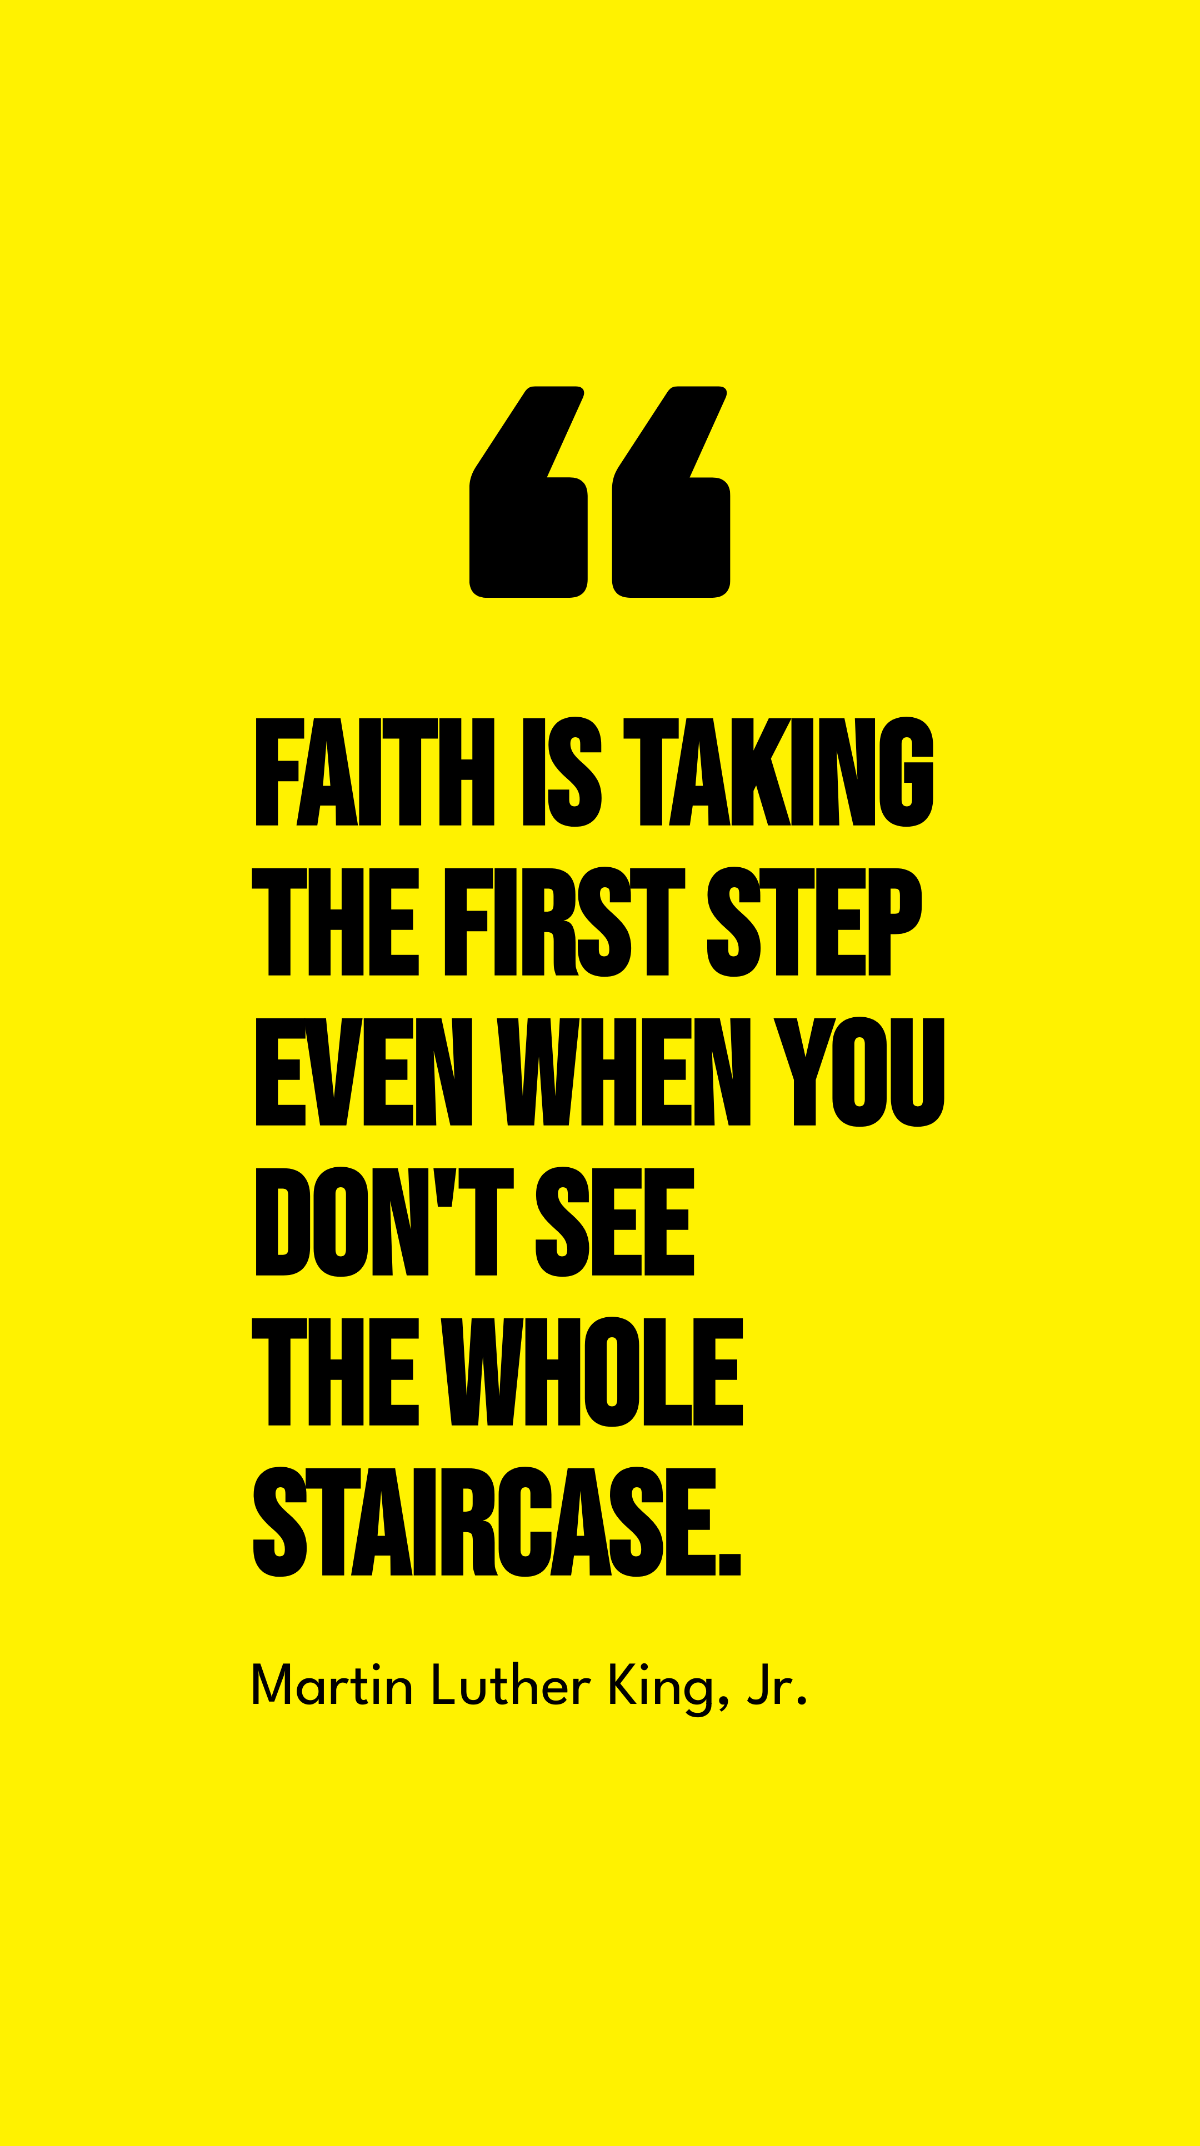 Martin Luther King, Jr. - Faith is taking the first step even when you don't see the whole staircase. Template